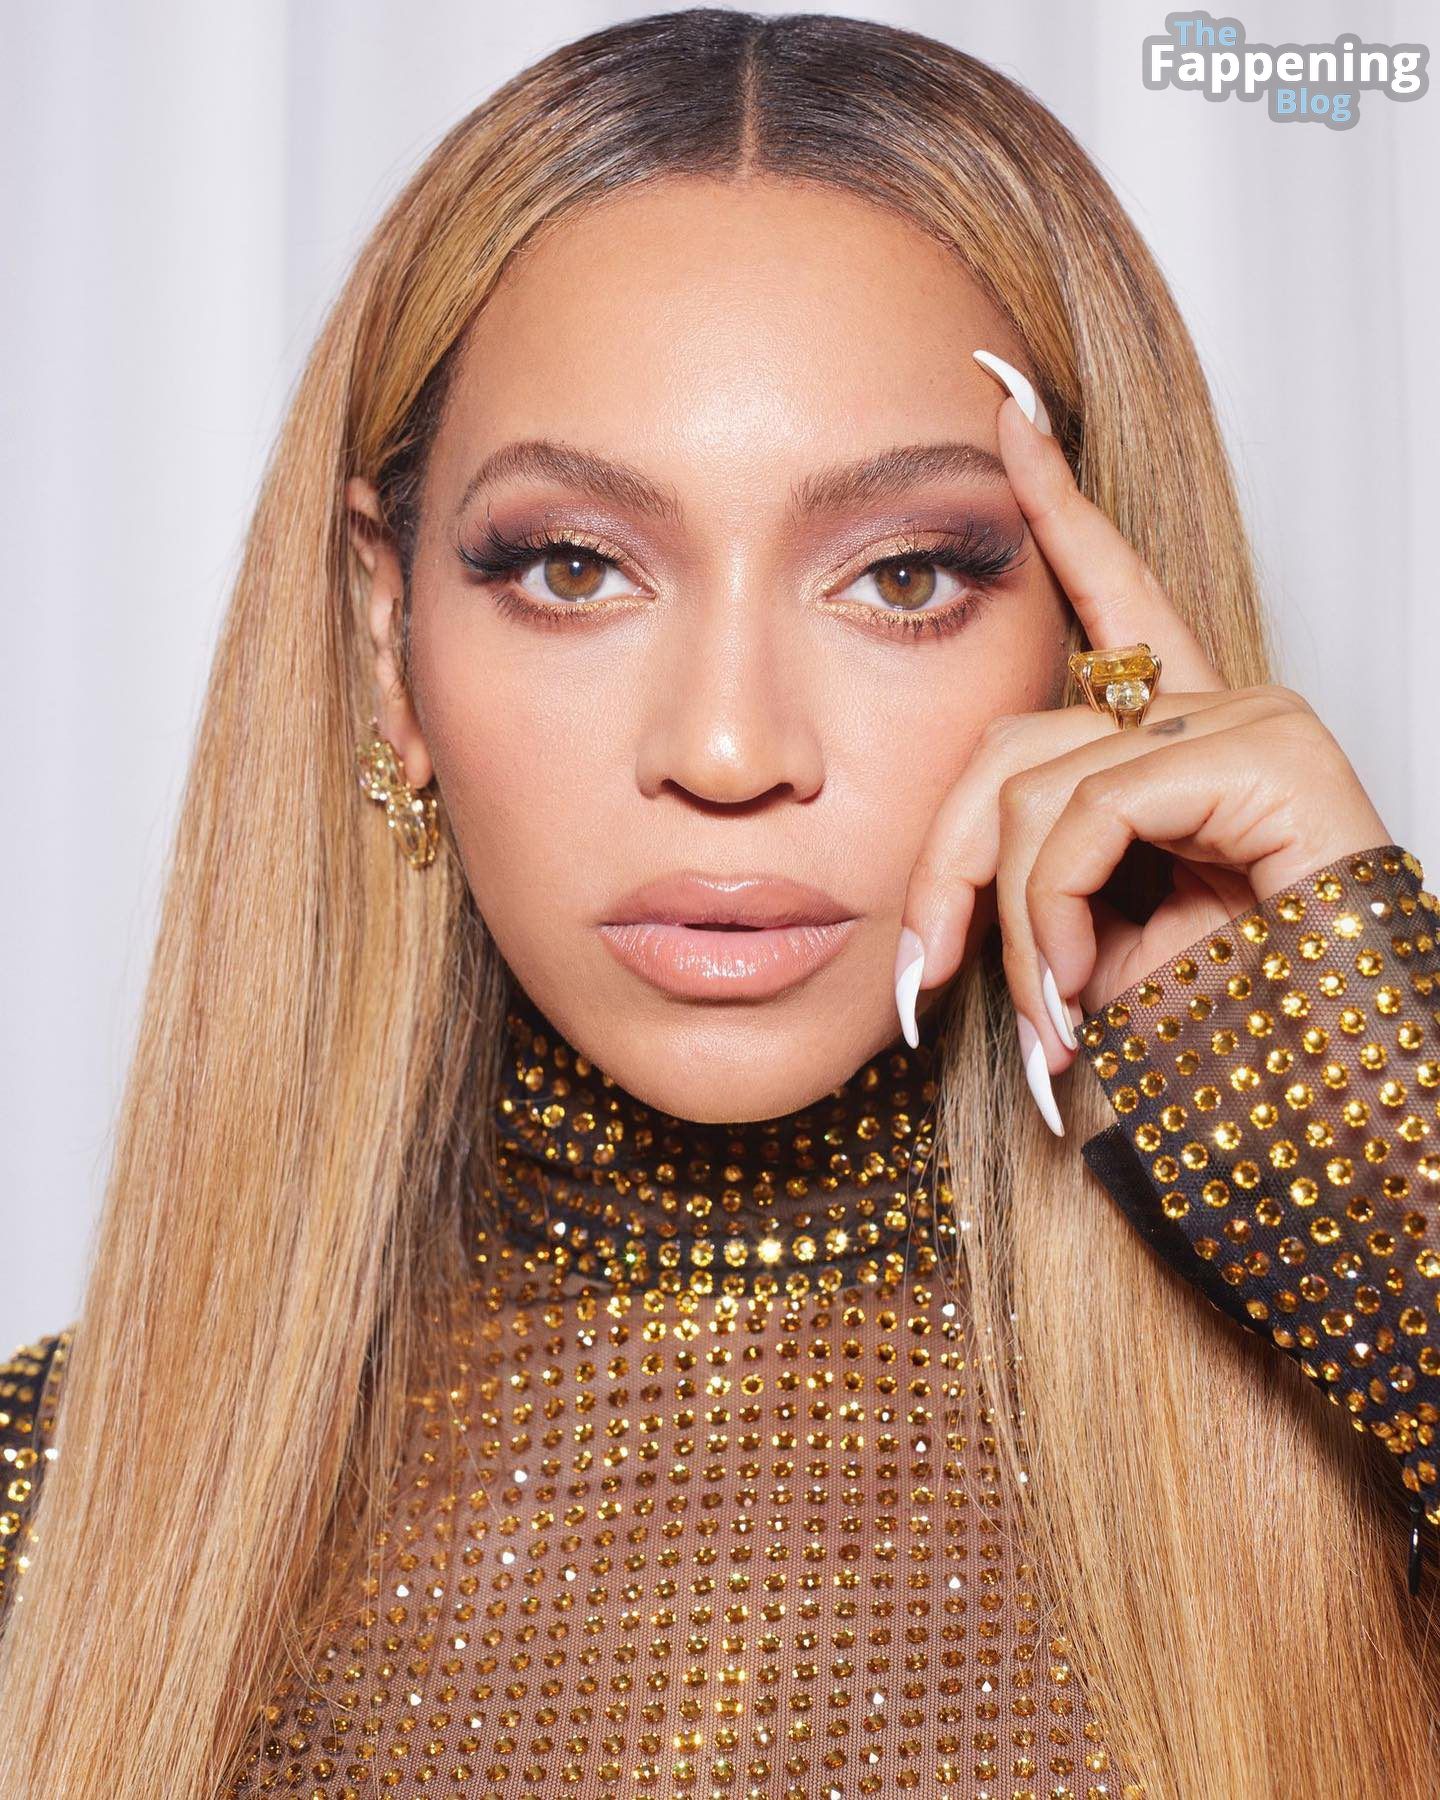 Braless-Beyonce-See-Through-Glamour-4-thefappeningblog.com_.jpg